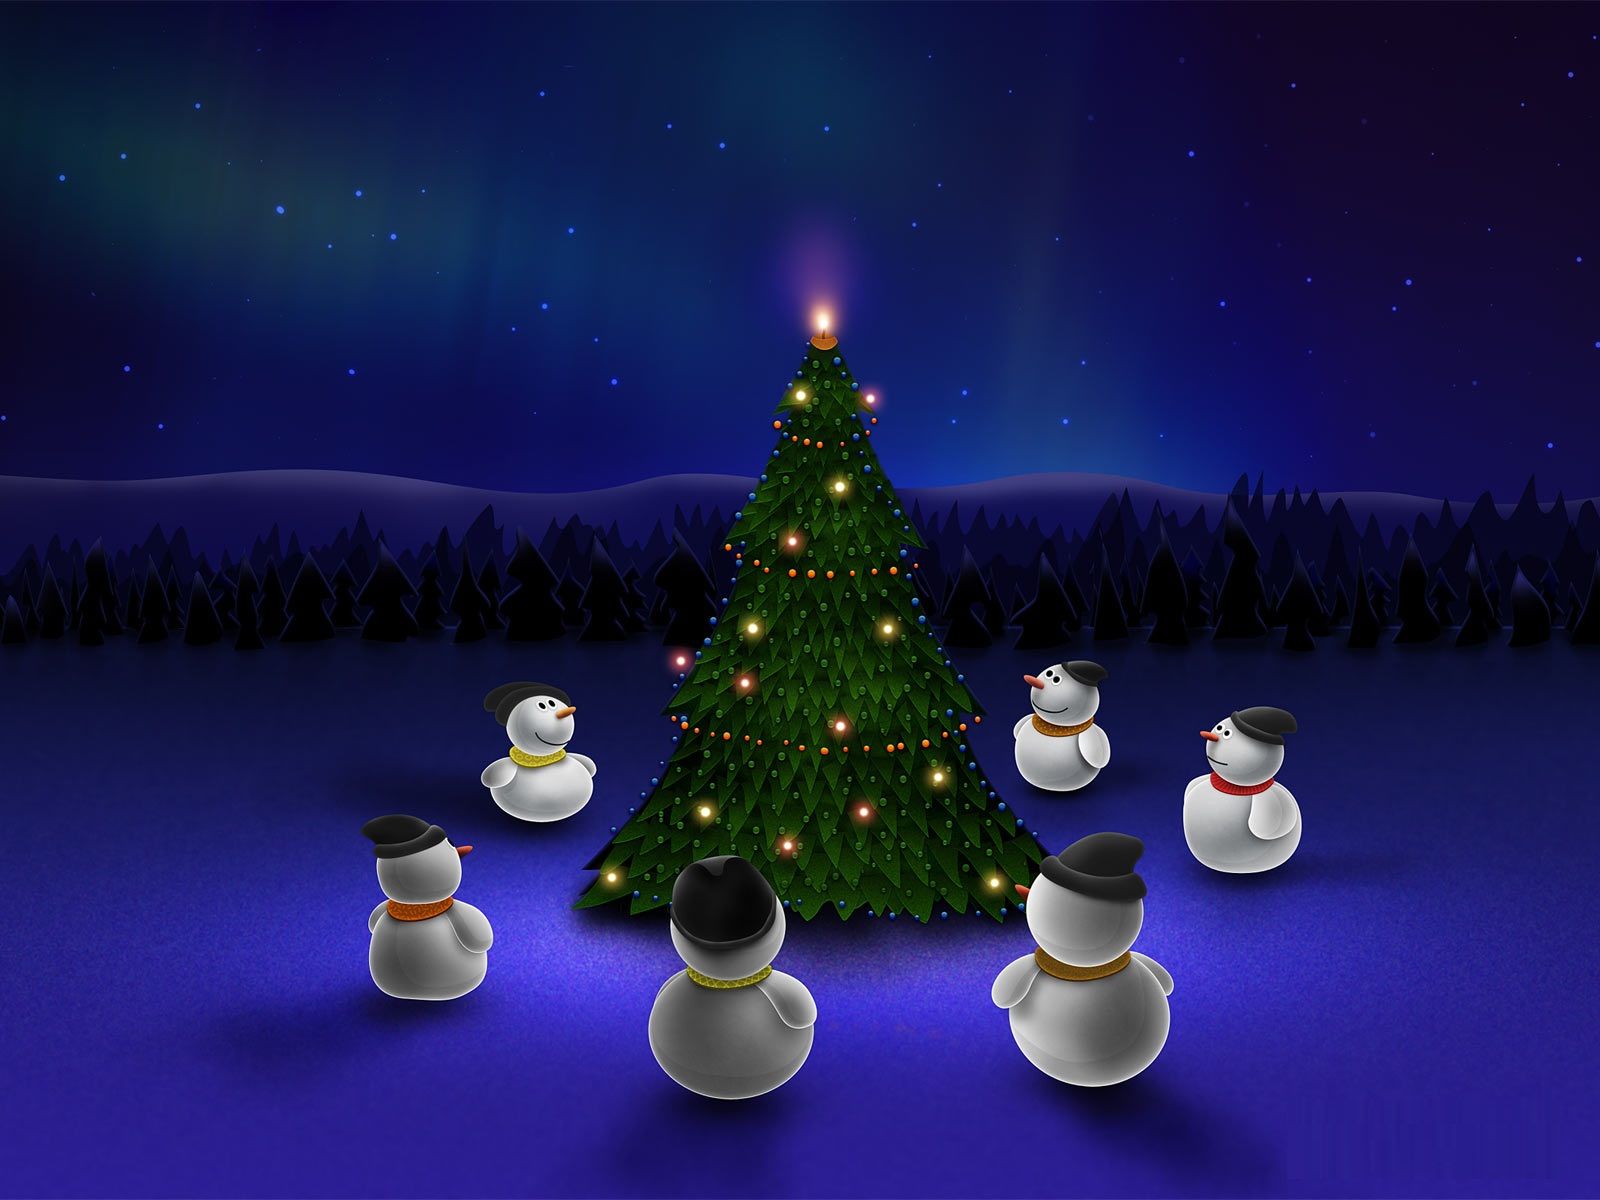 Christmas Live Wallpapers Download Free Christmas Desktop Live Background Full HD Wallpapers